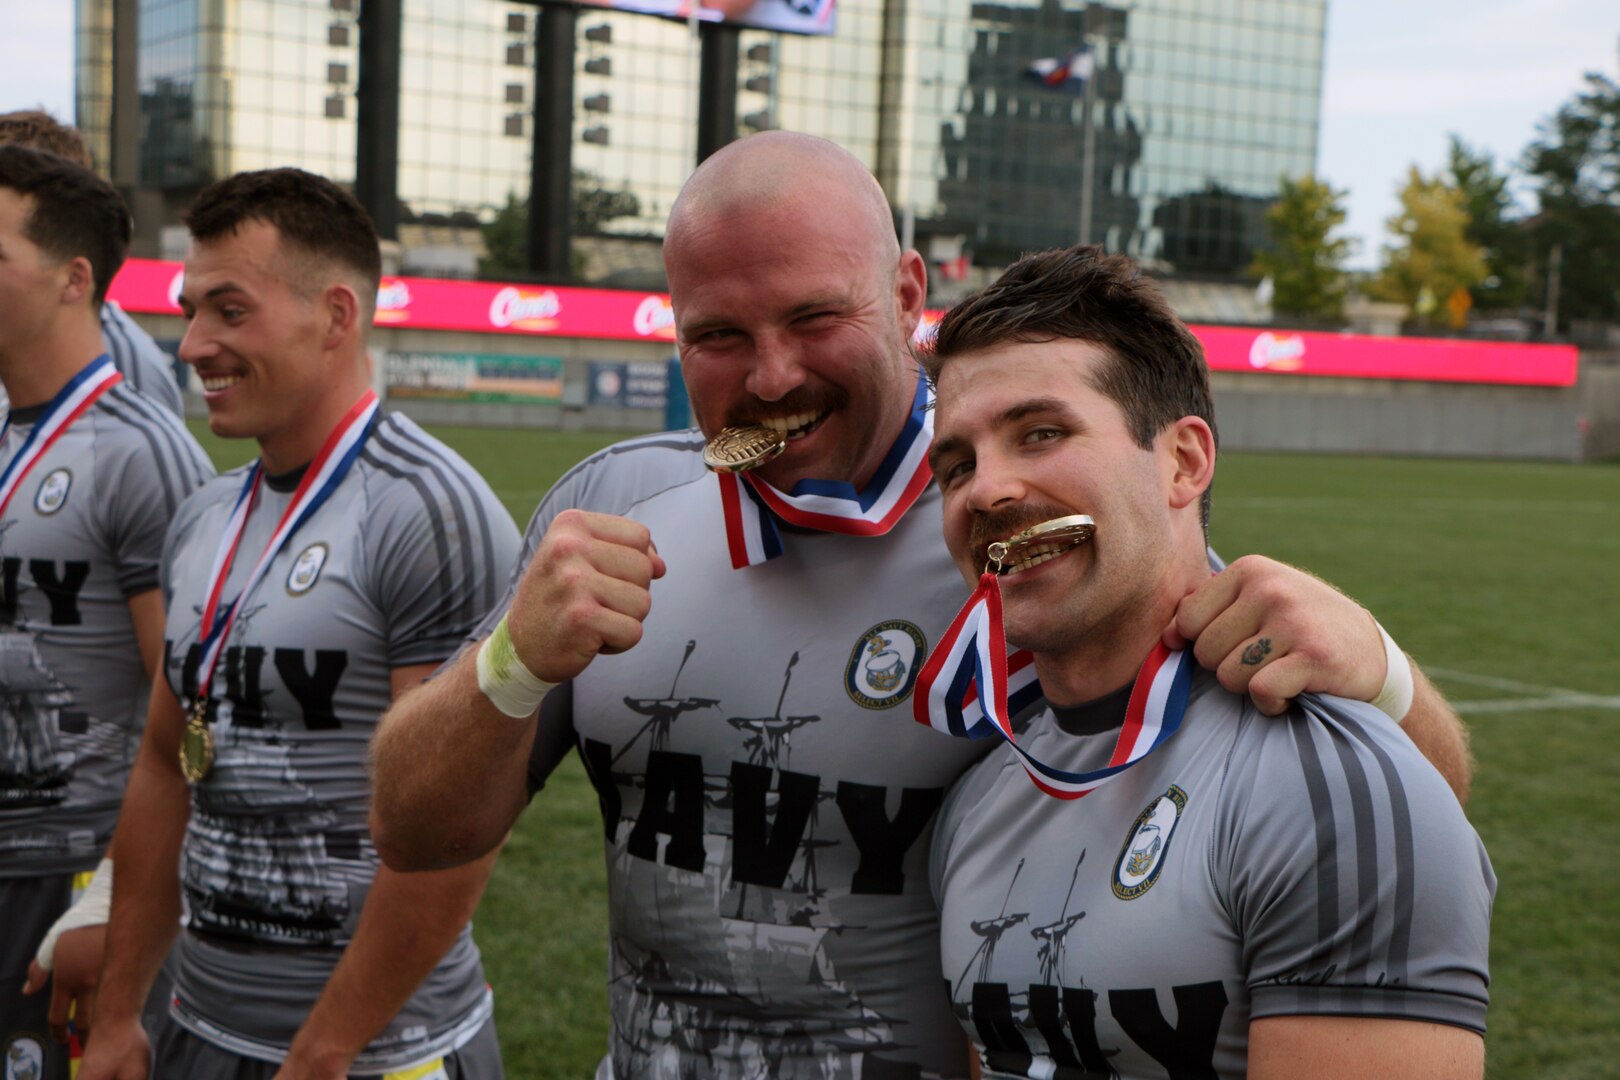 Navy Lieut. Adam D'Amico of Naval Shipyard Portsmouth, Va. (right) and Petty Officer First Class James Irey of Marine Corps Support Facility New Orleans, La. (left) take a bite of their well deserved gold medals after Navy claims victory at the 2021 Armed Forces Rugby Championship held in conjunction with the 2021 Rugbytown 7's Tournament, held from 20-22 August.  Service members from the Navy, Air Force (with Space Force personnel) and Coast Guard battle it out for gold.  (Department of Defense Photo, Released)